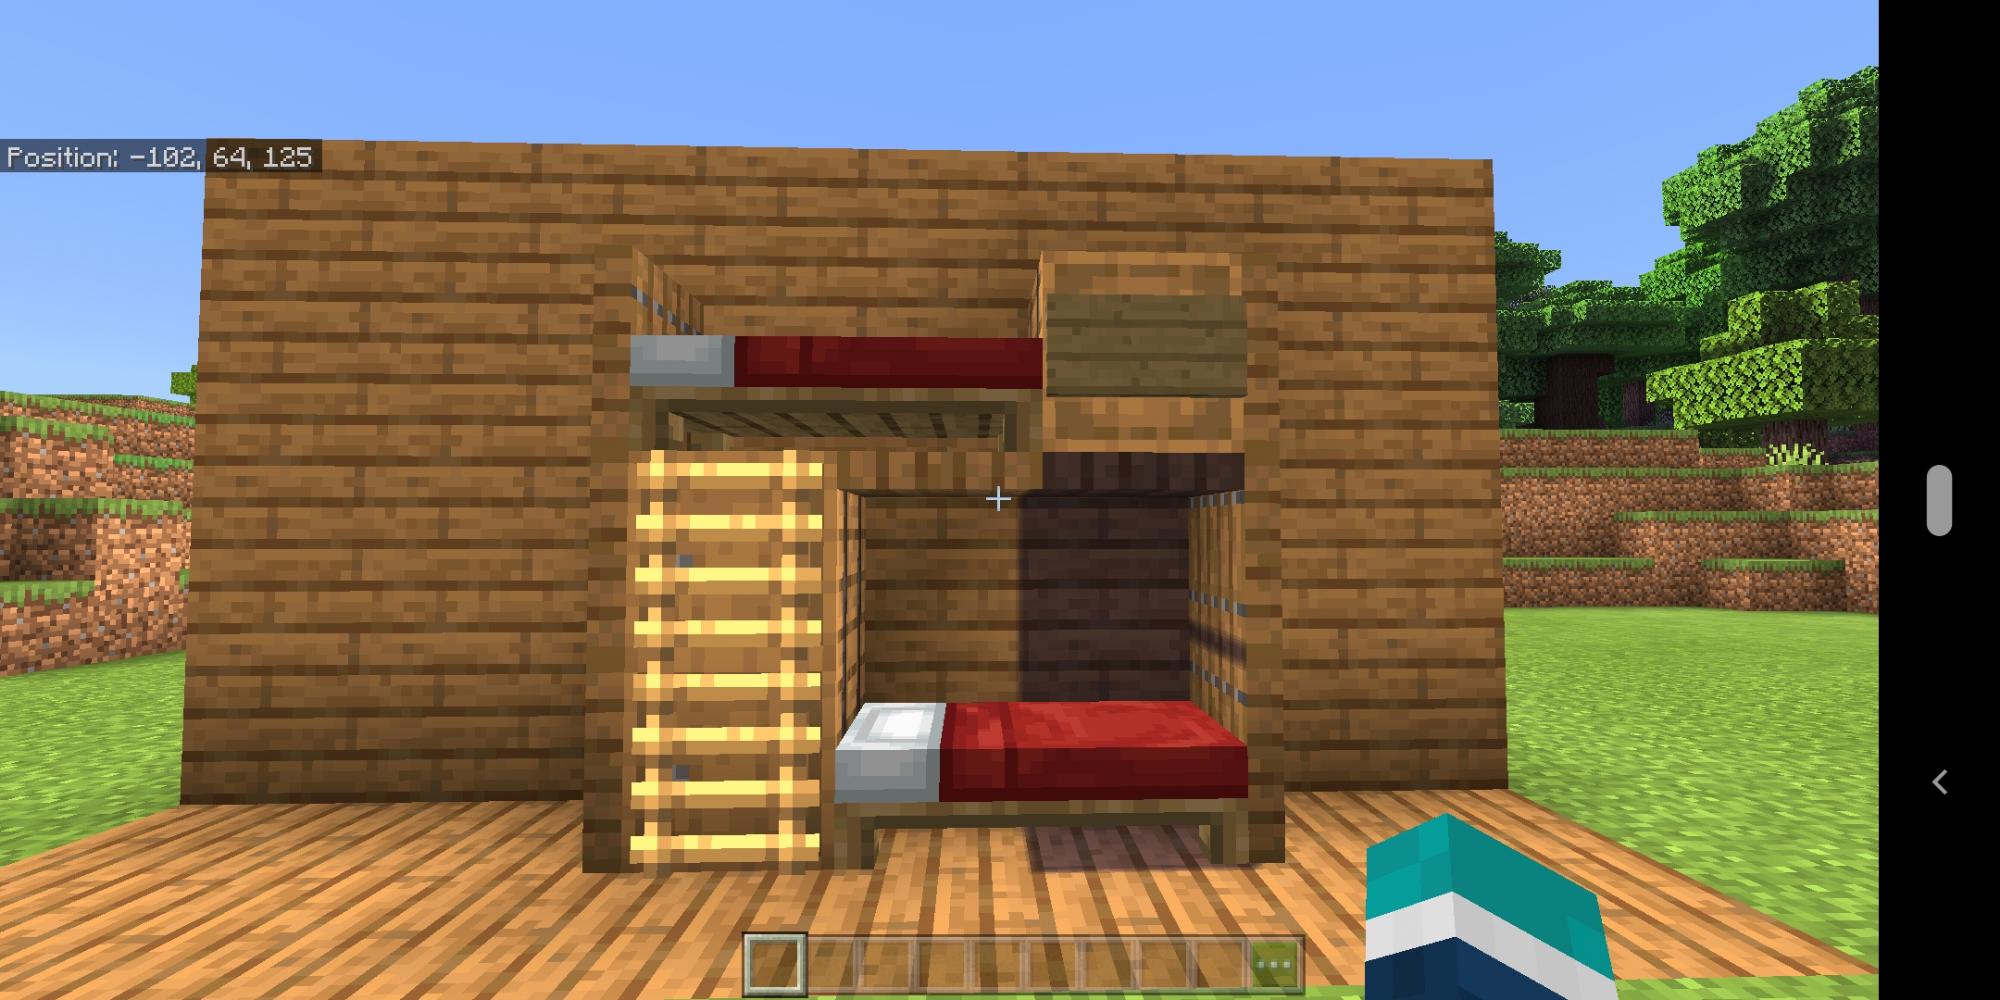 This Bunk Bed I Made Fandom, How To Build A Bunk Bed In Minecraft